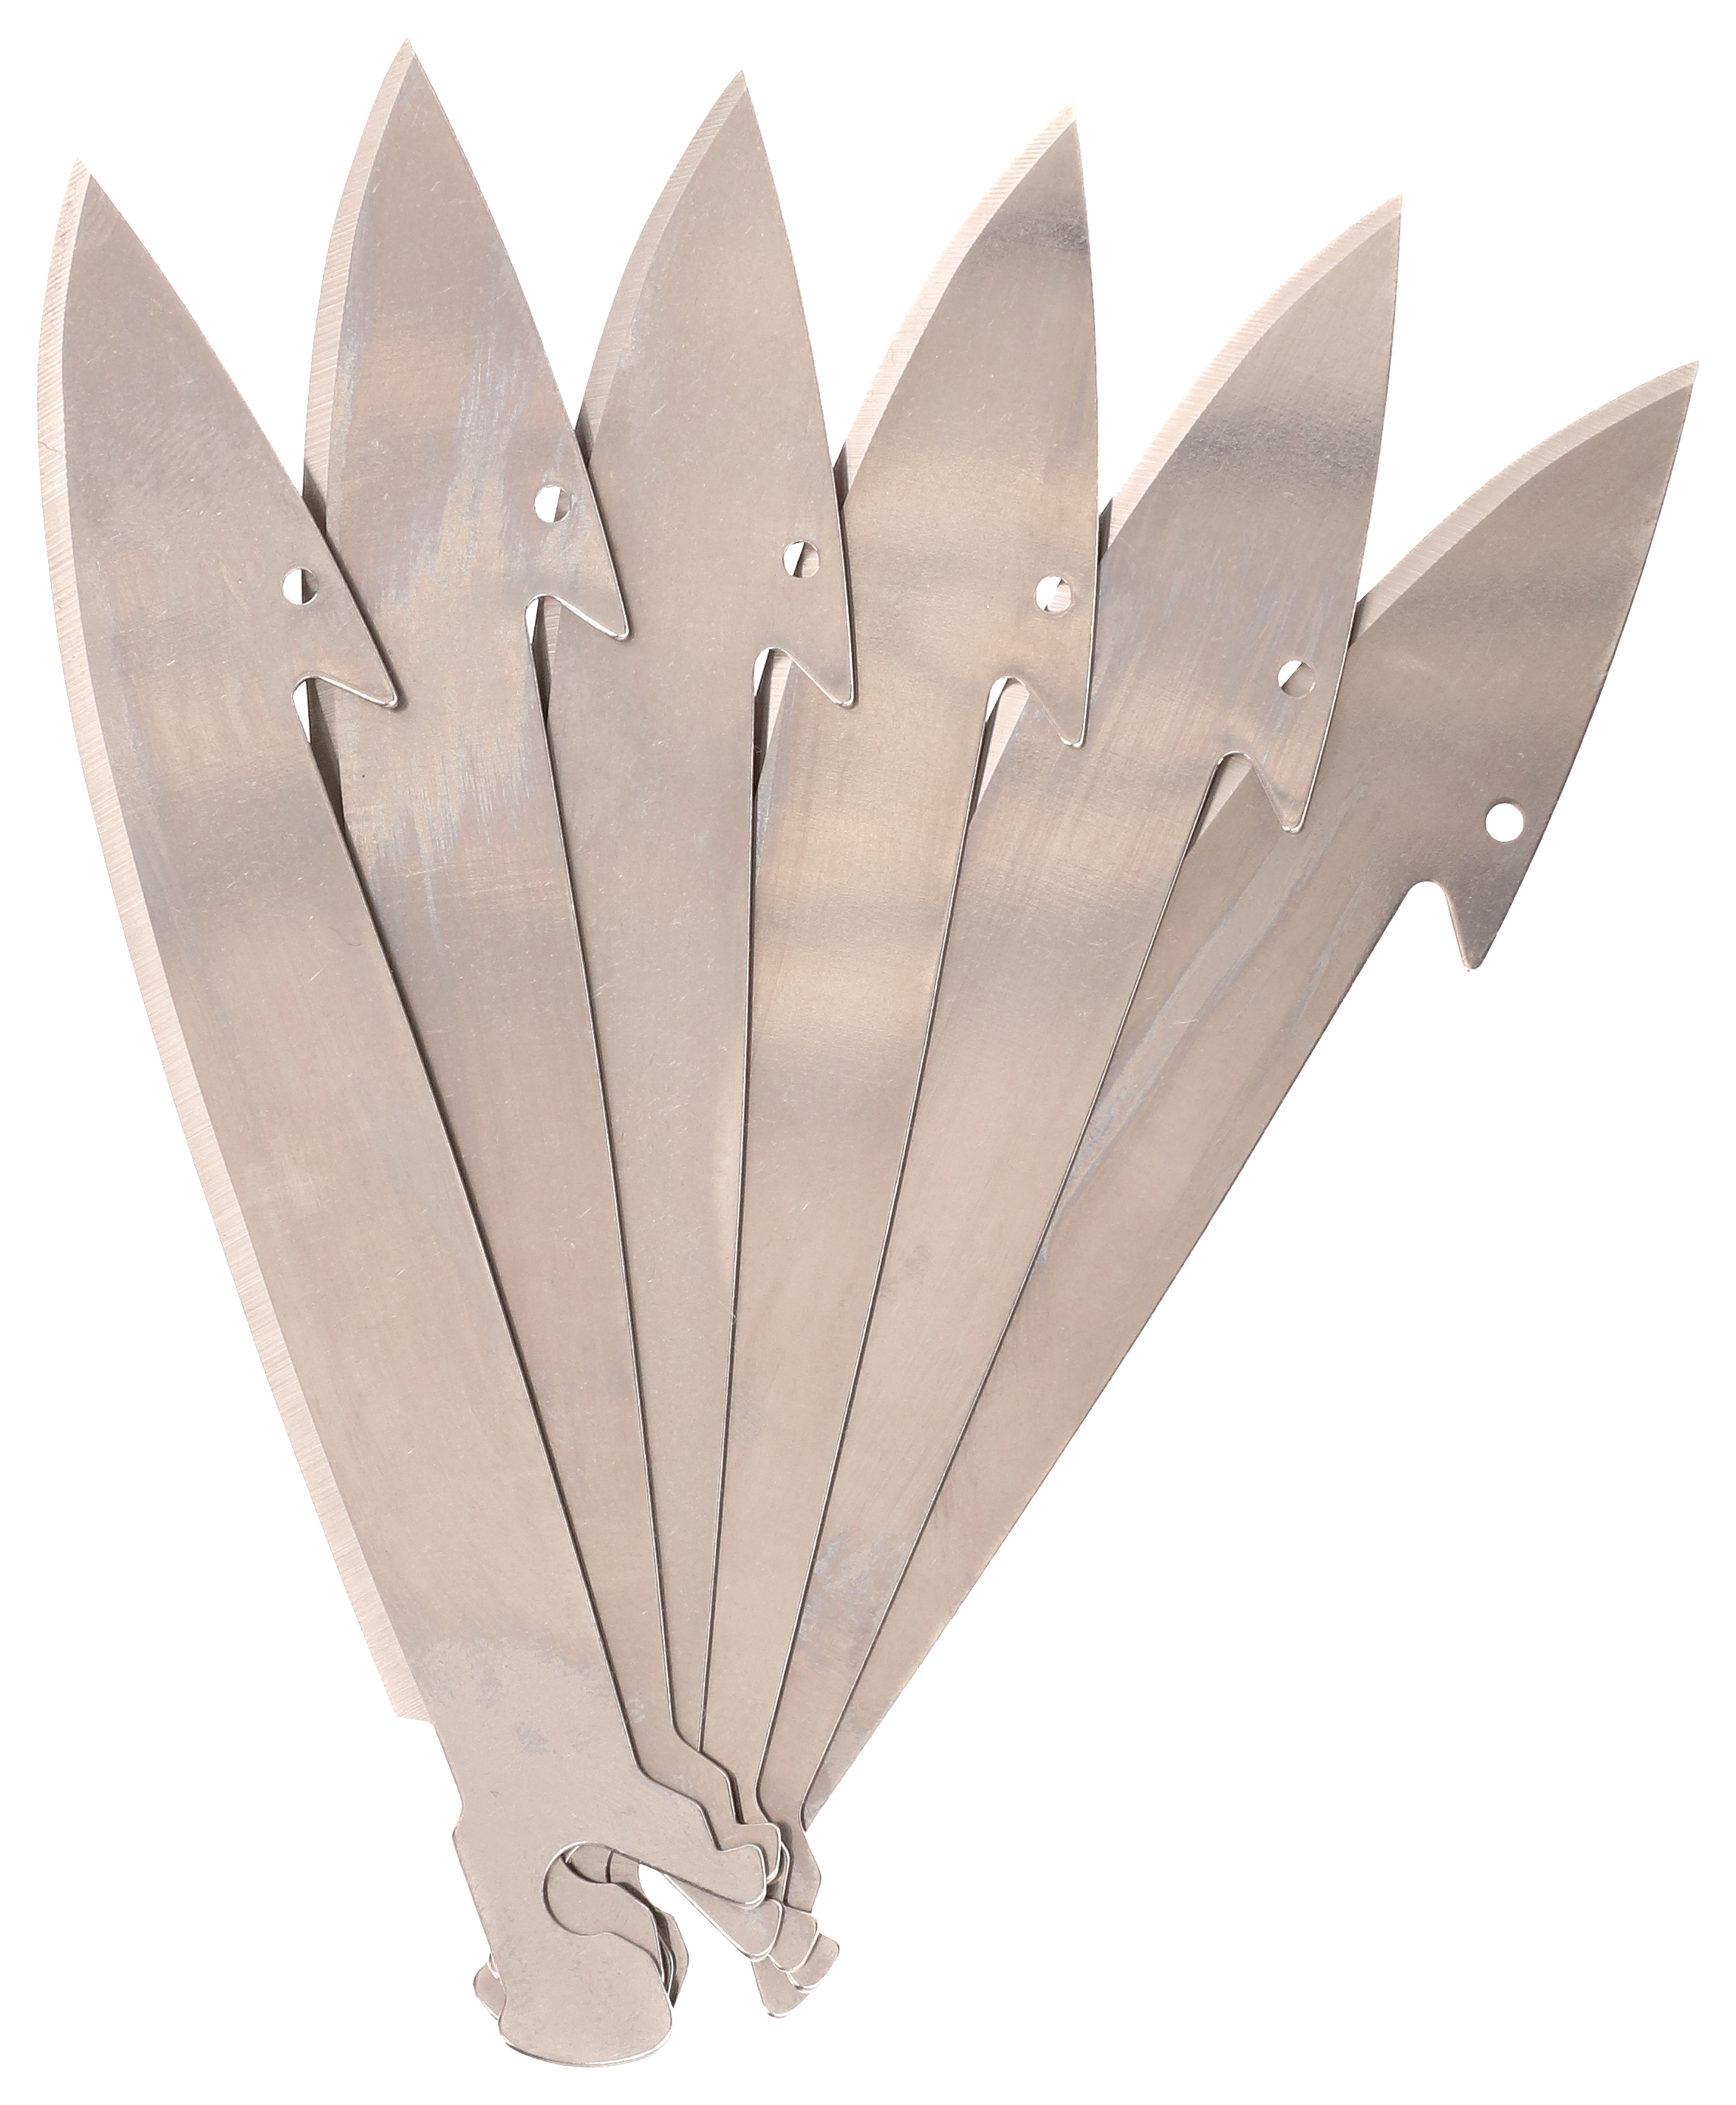 Muddy Swap Knife 6-Pack Replacement Blades